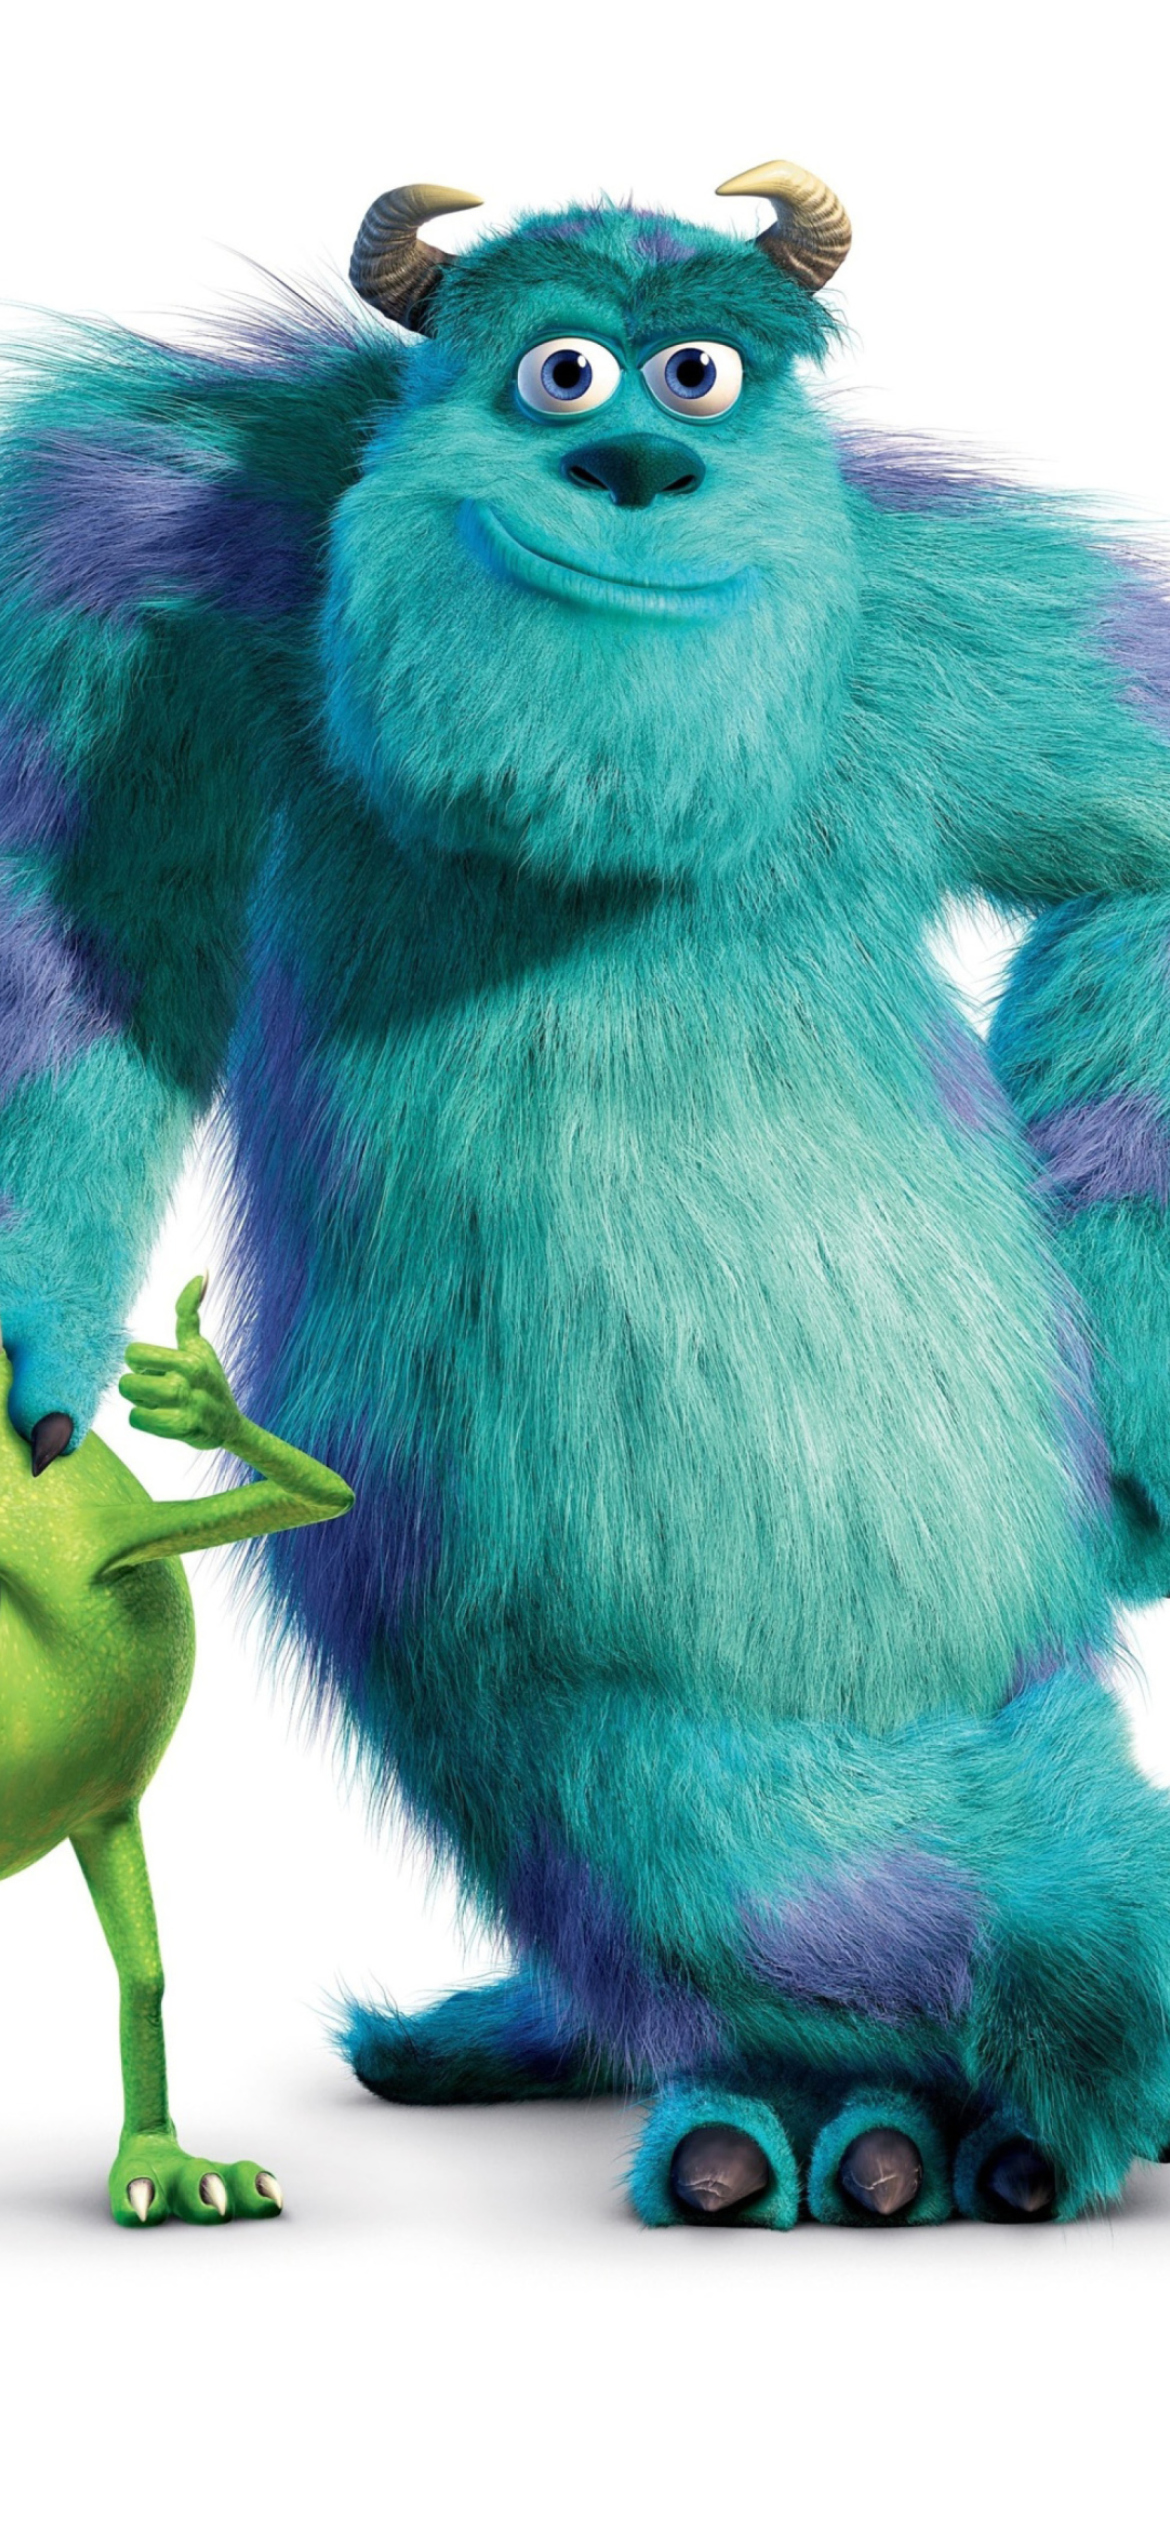 Monsters Inc Wallpaper for iPhone 12 Pro